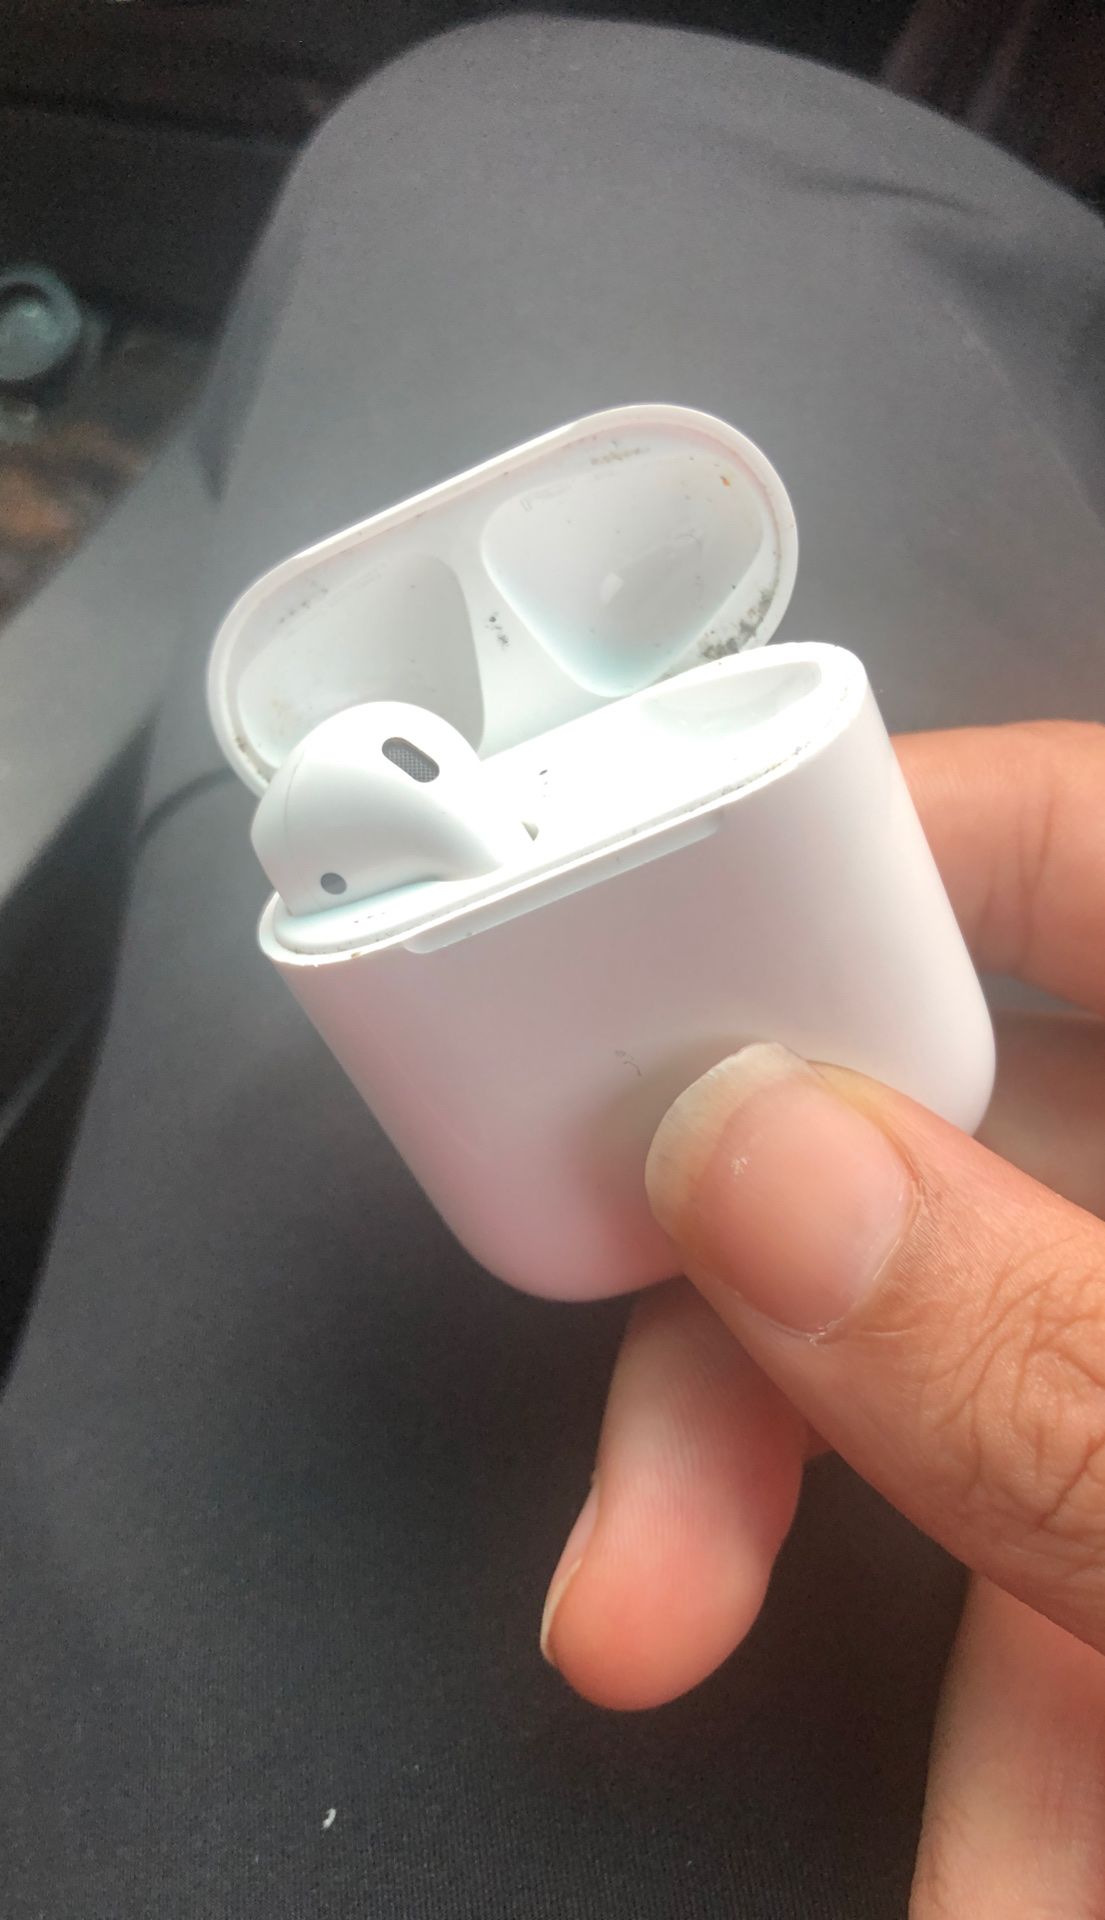 Left AirPod and Charging Case